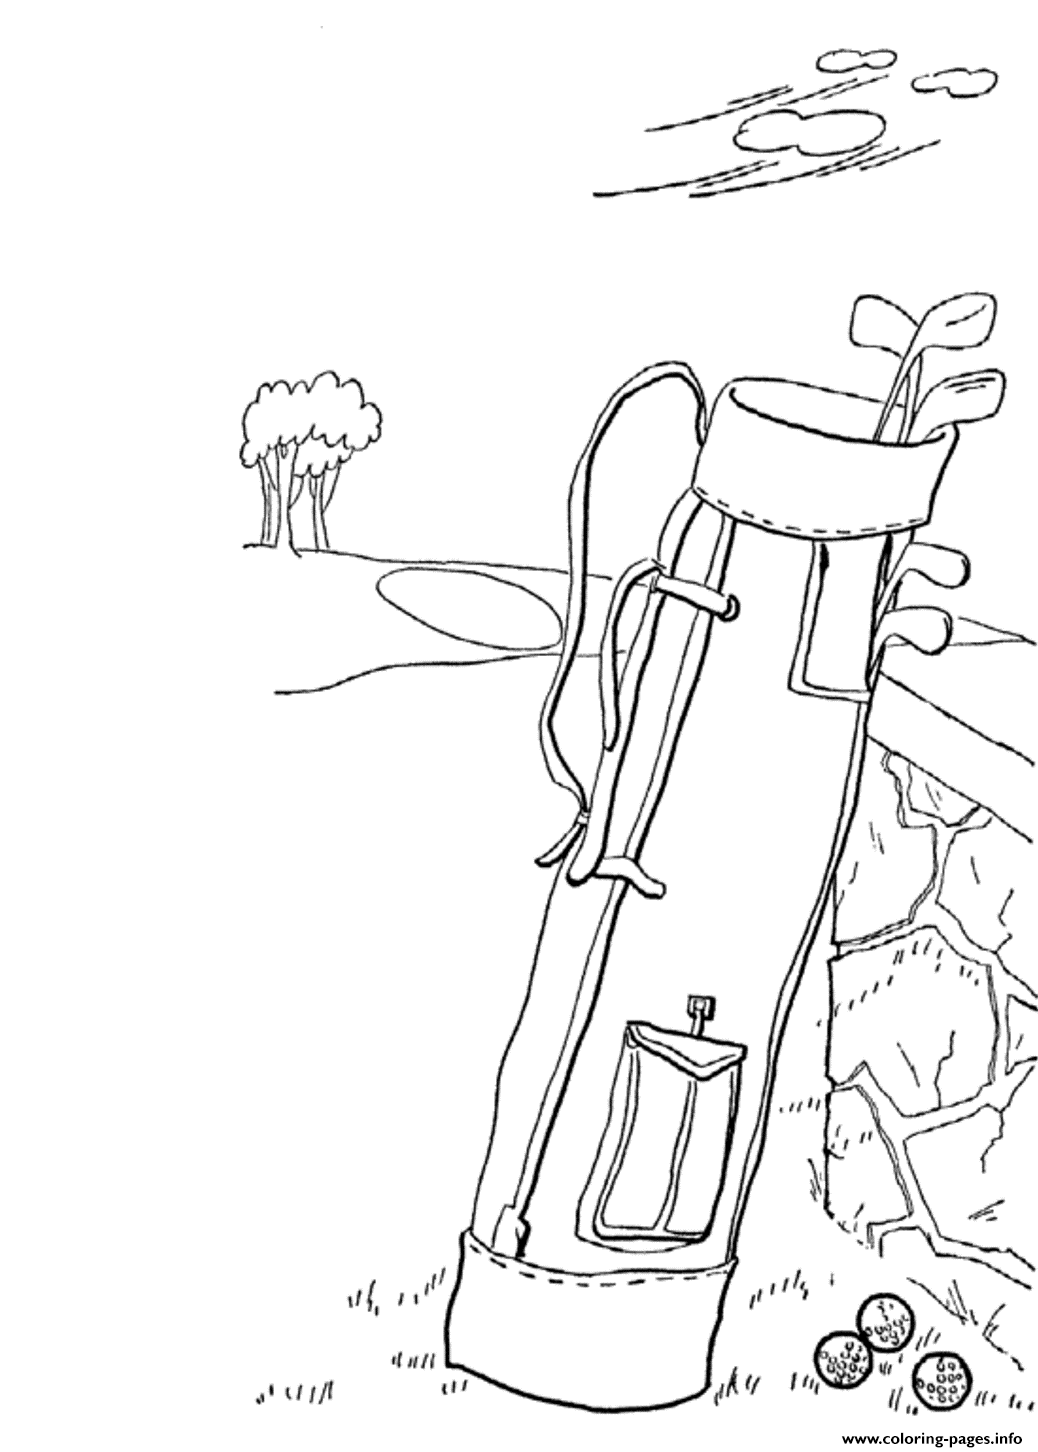 Golf Bag Sports S5865 coloring